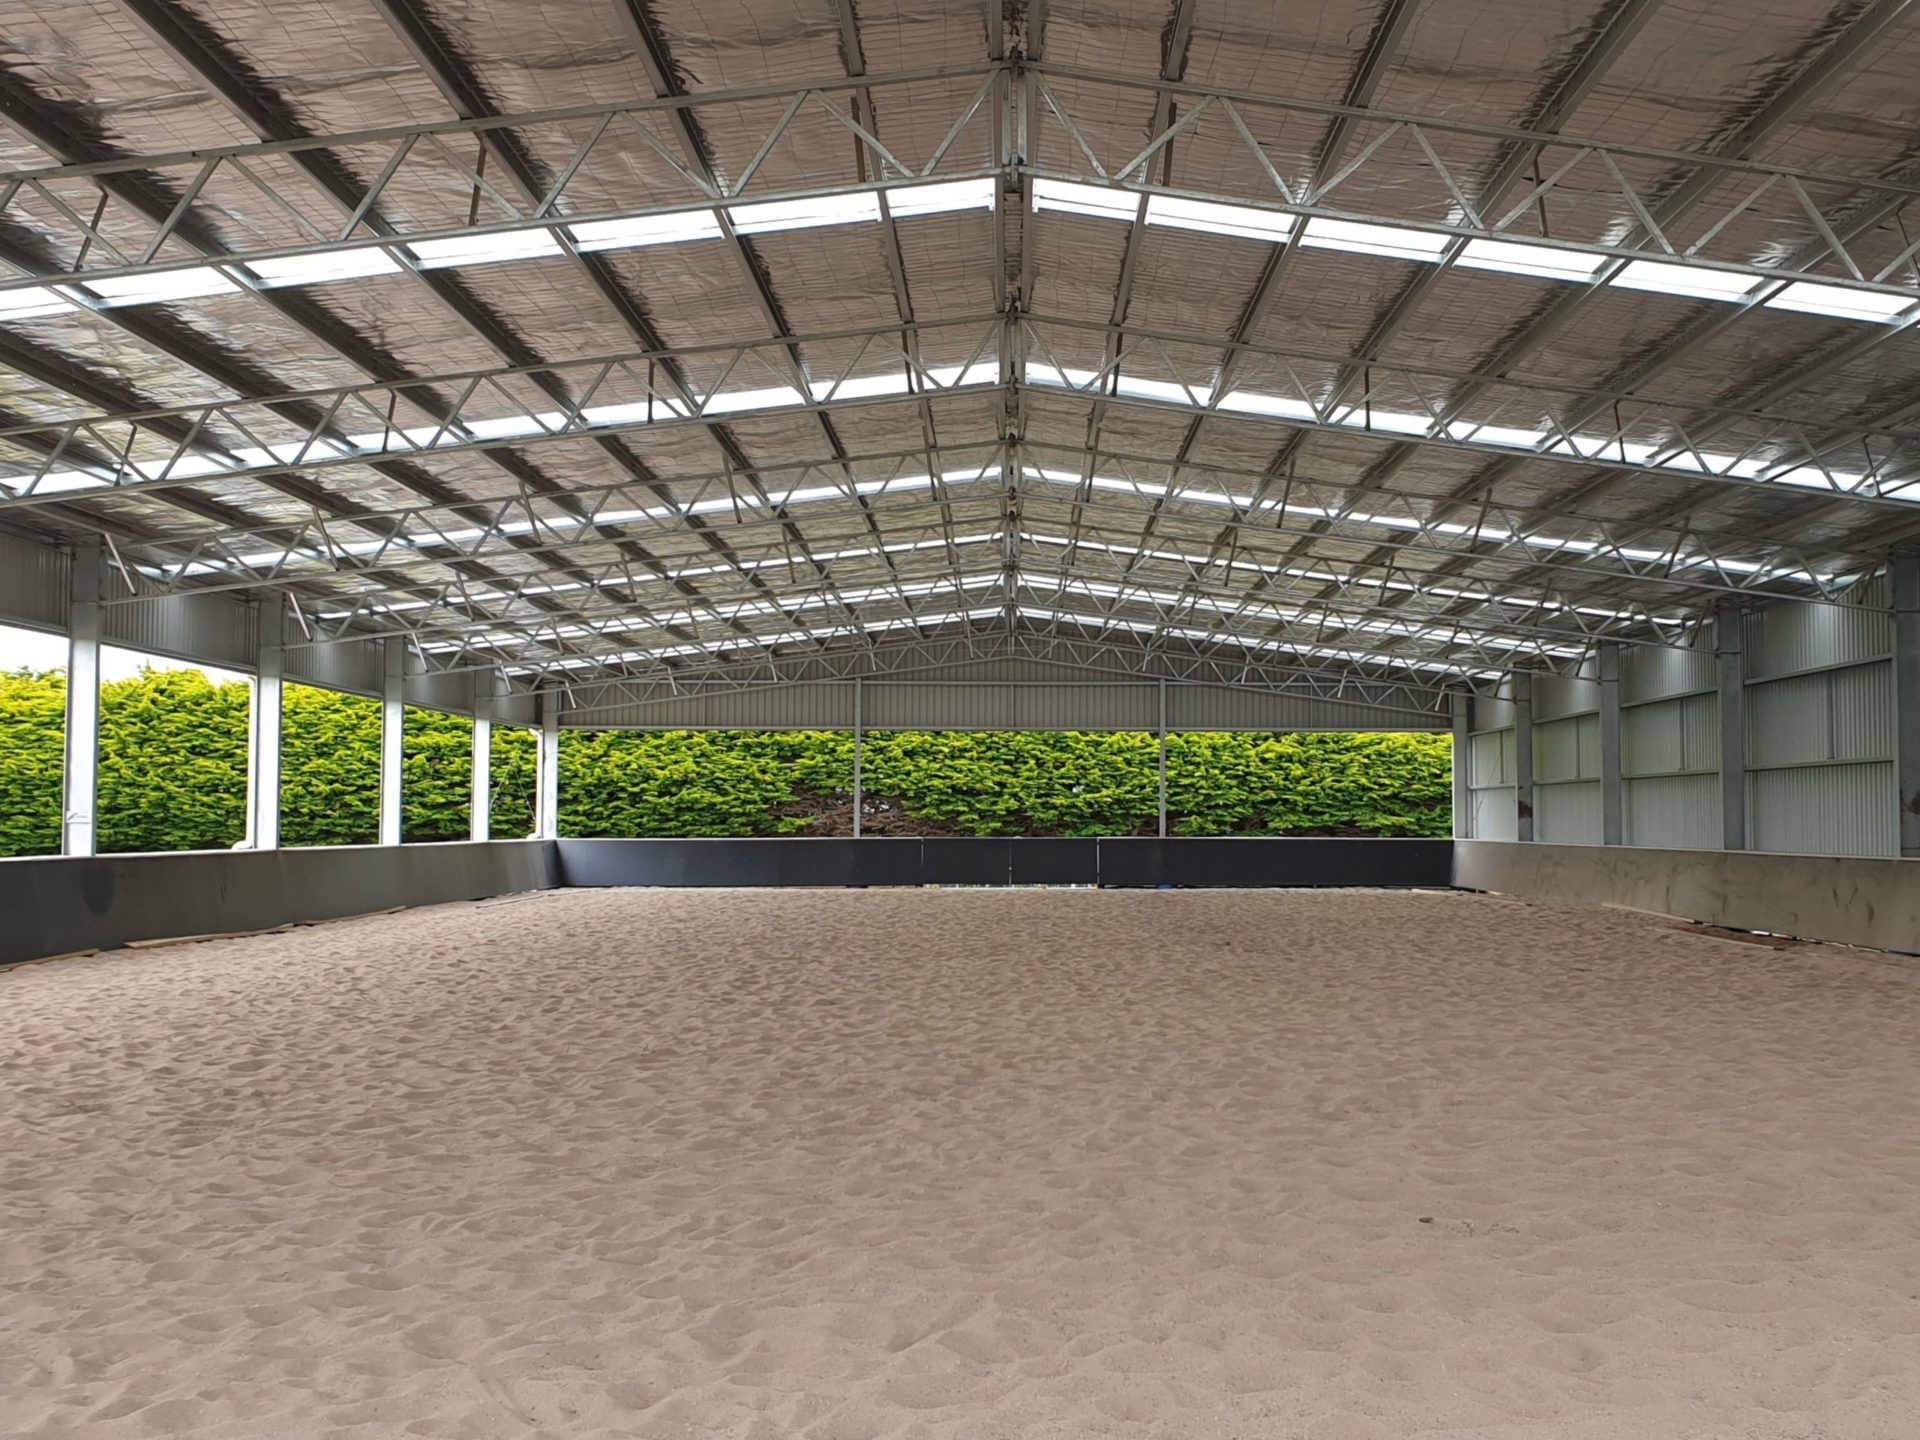 You are currently viewing A 60m x 24m x 5.25m horse arena cover